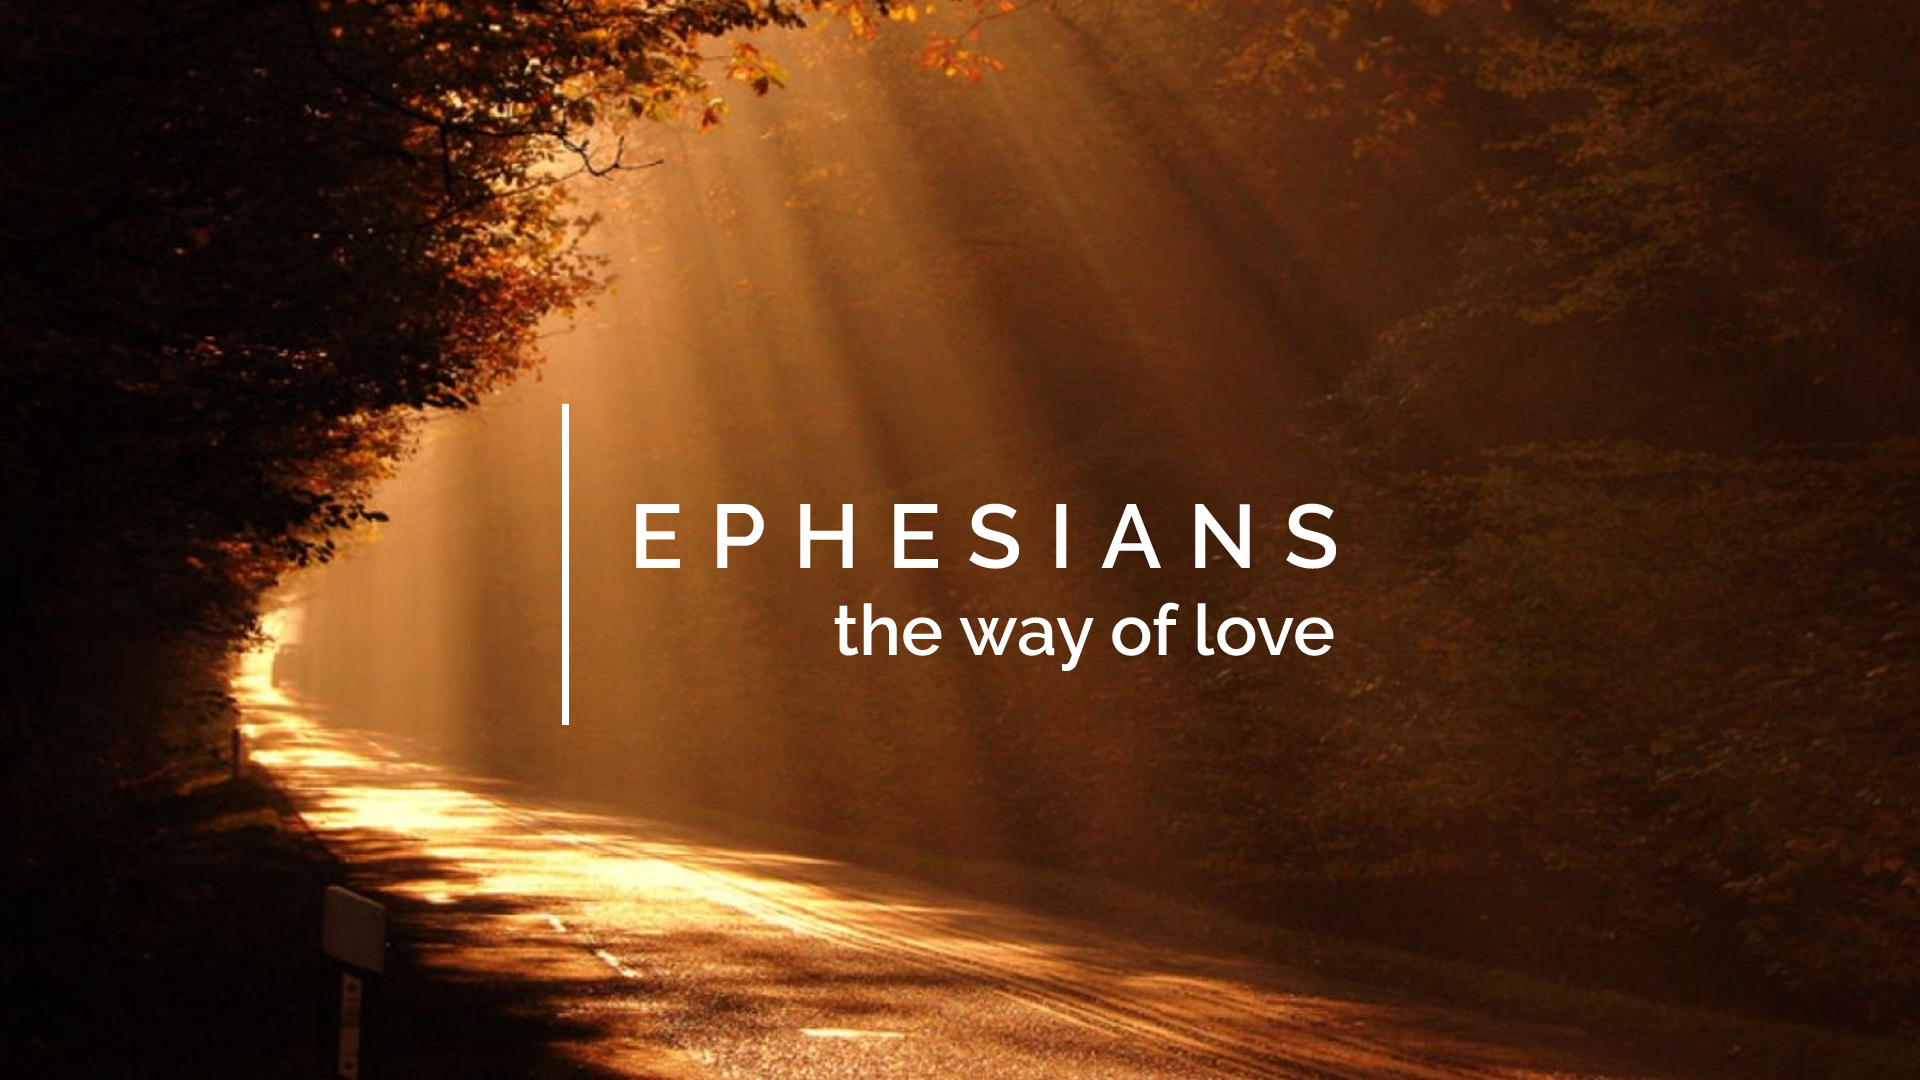 EPHESIANS | The Way of Love - Just Shut Your Mouth!